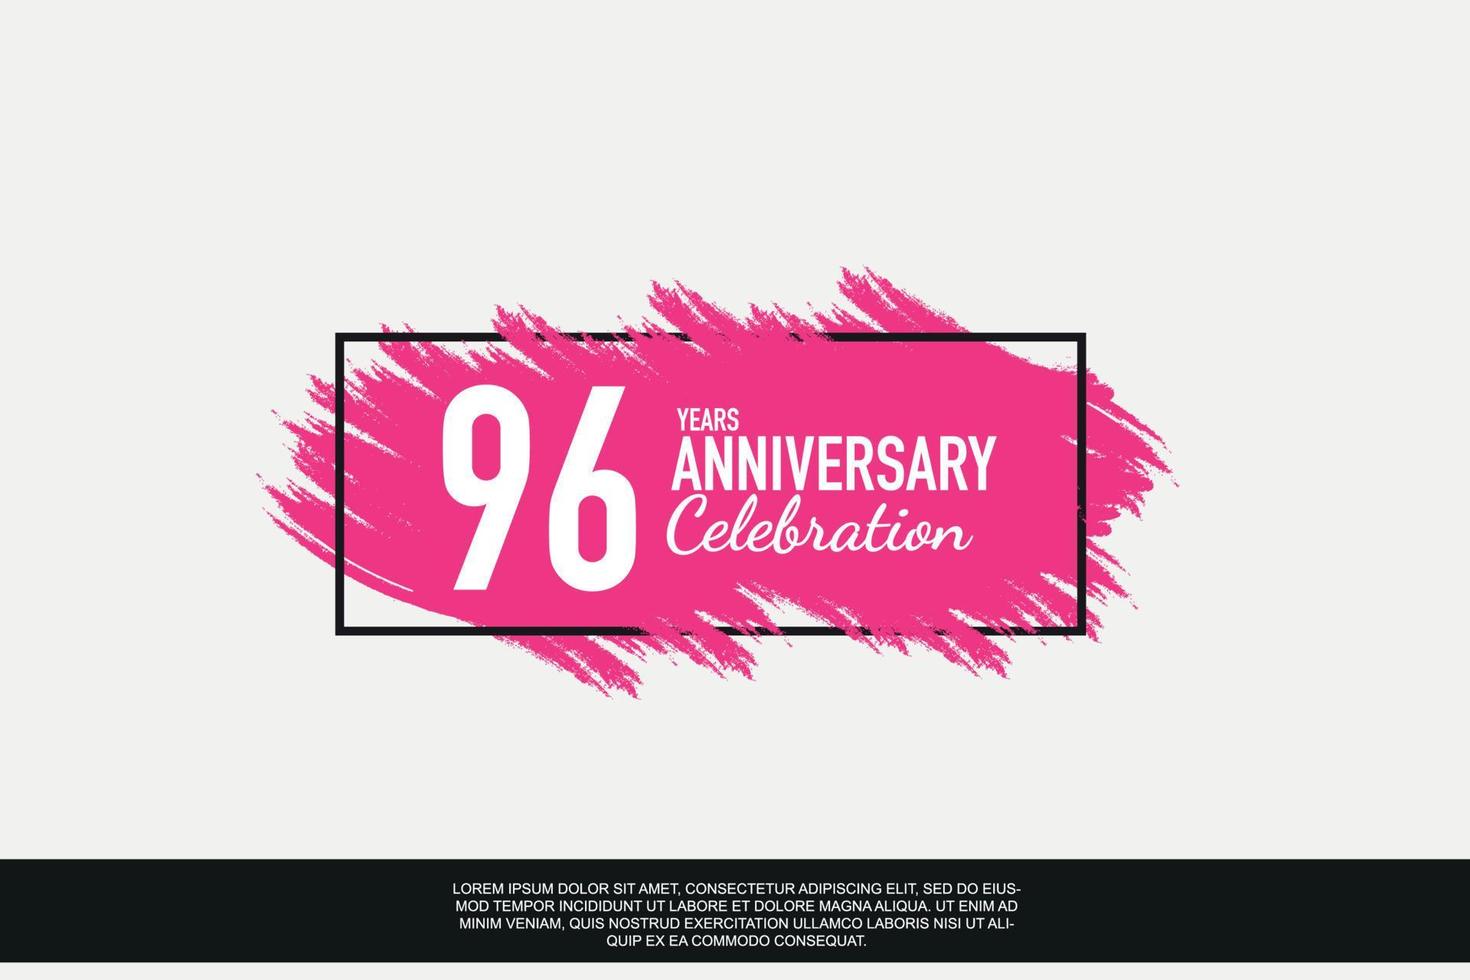 96 year anniversary celebration vector pink design in black frame on white background abstract illustration logo